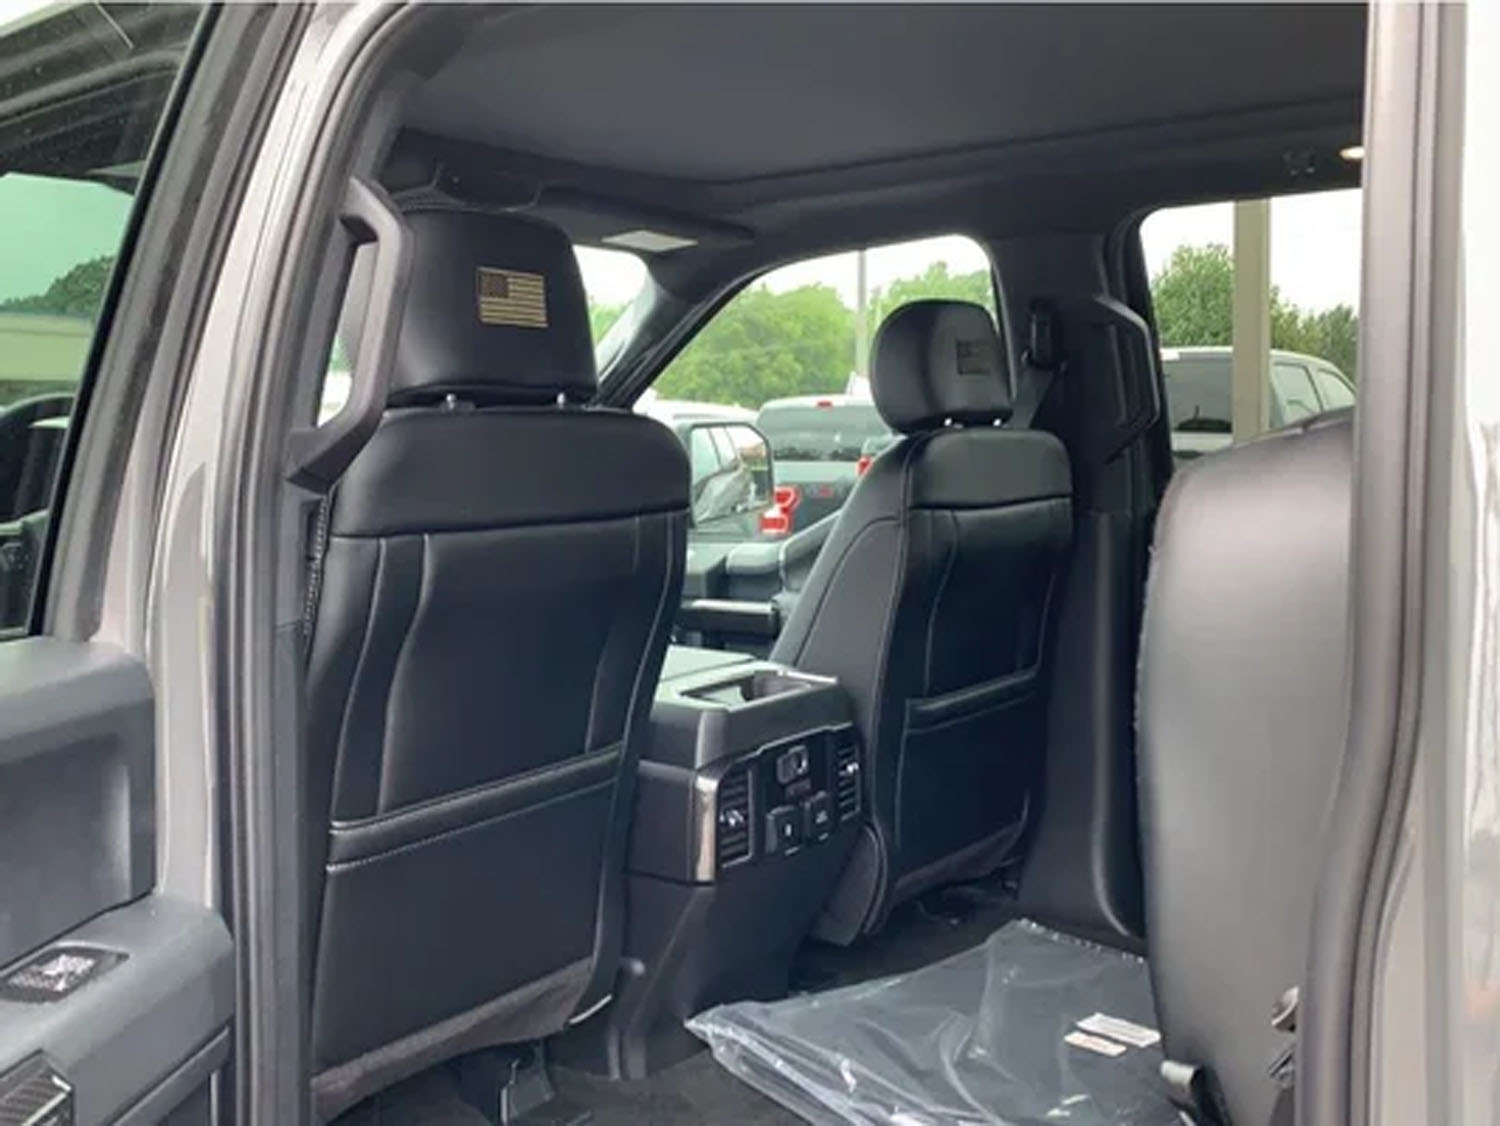 Check Out The 2019 Ford F-150 Tuscany Black Ops Desert Edition Truck